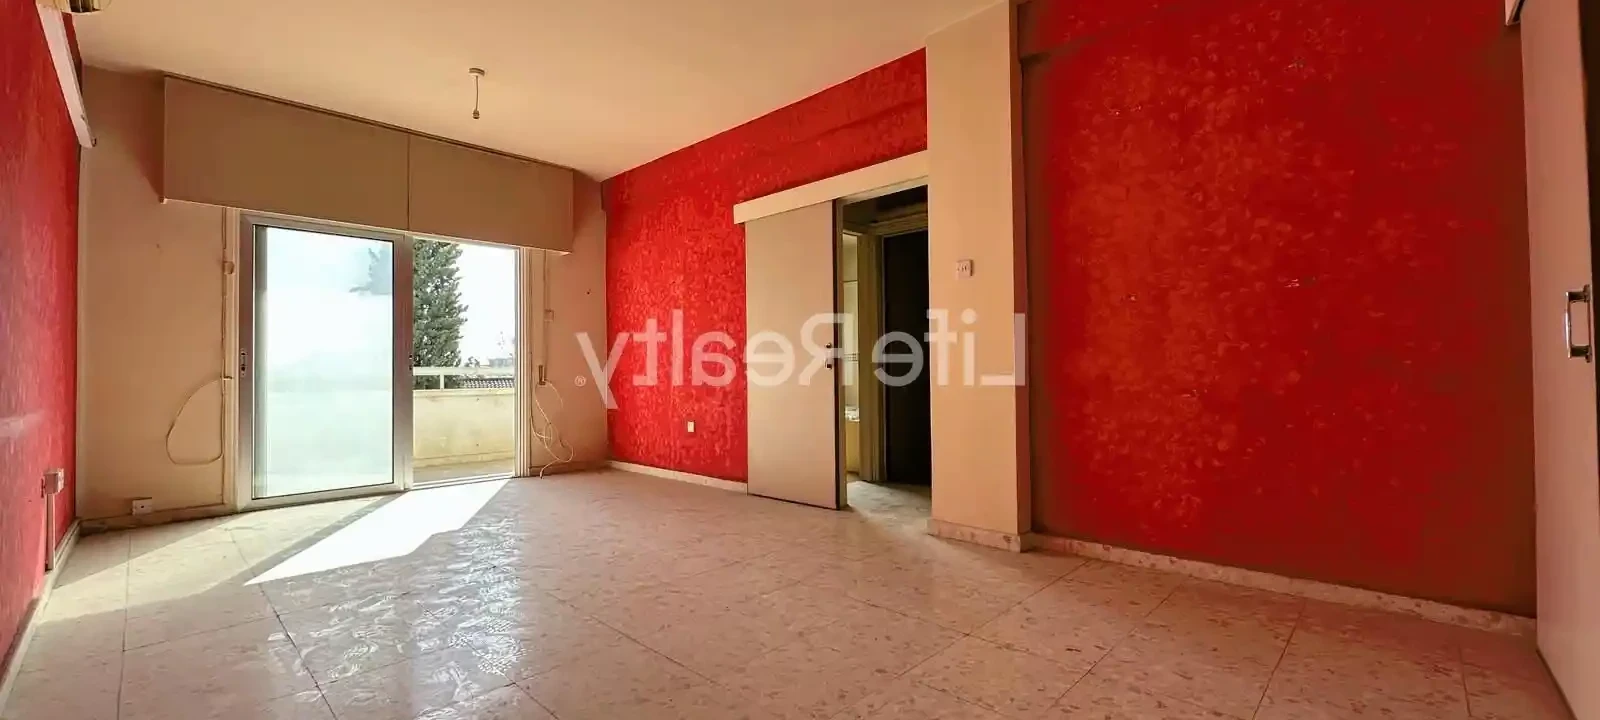 2-bedroom apartment fоr sаle €215.000, image 1